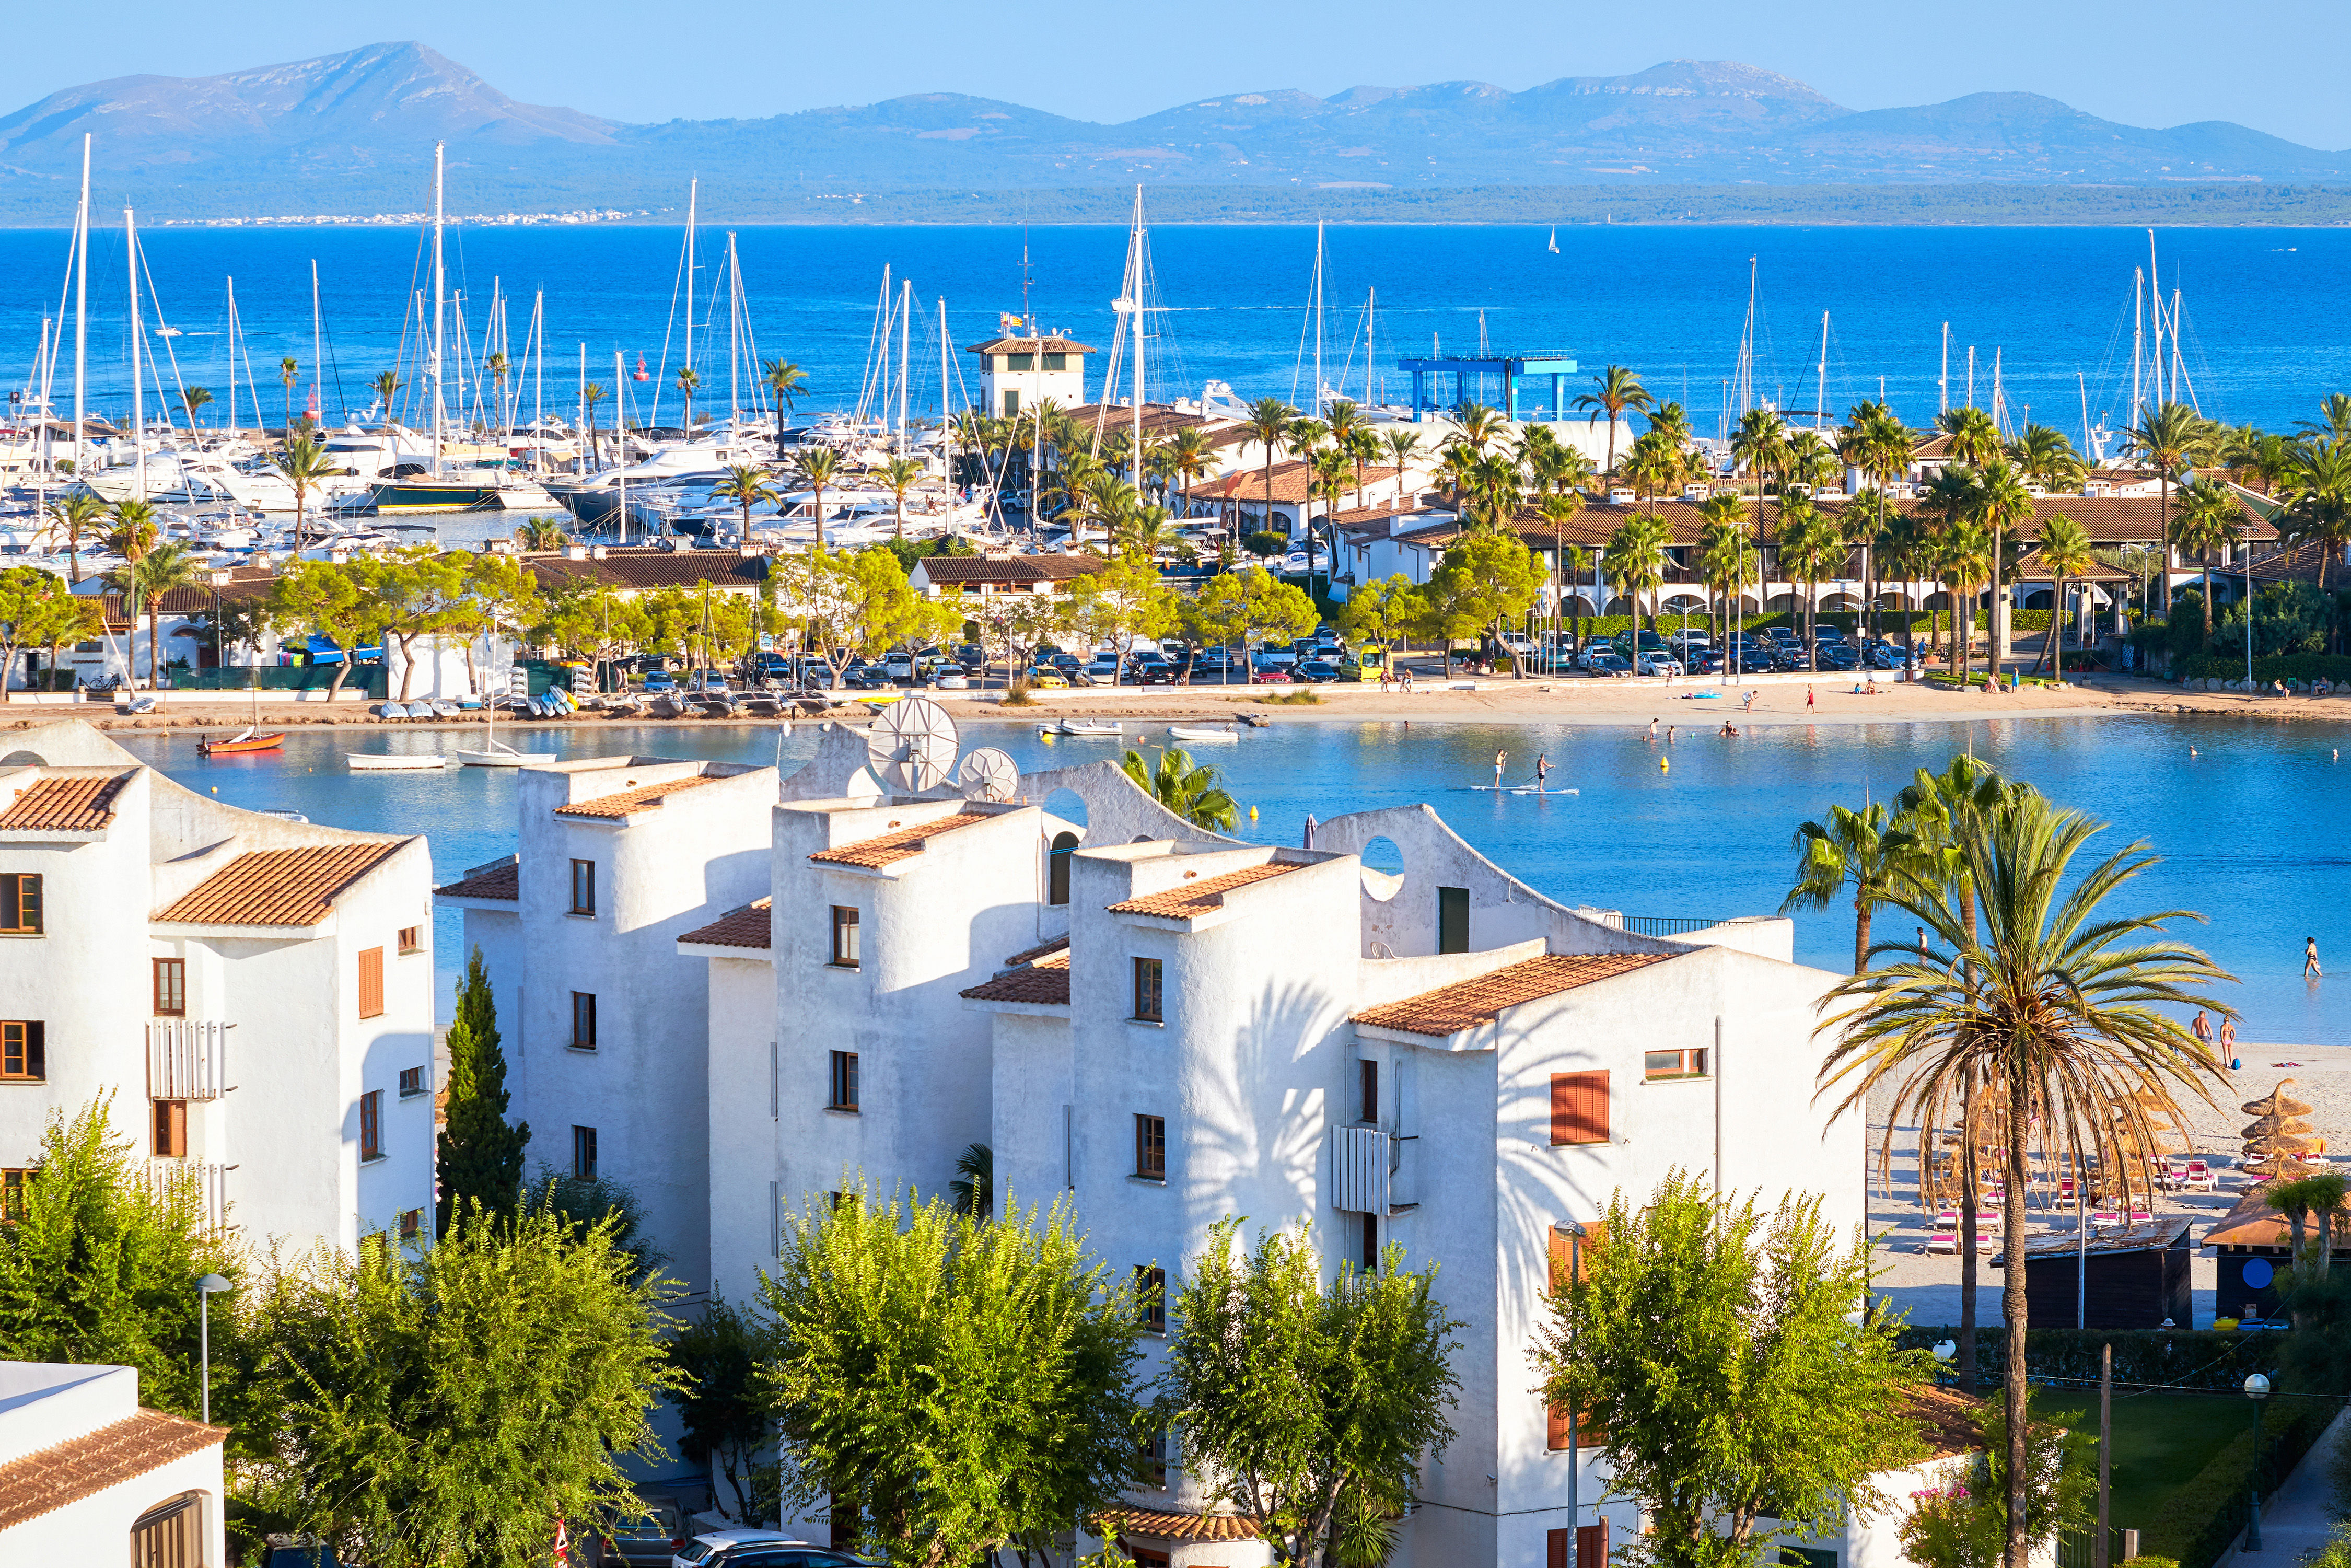 View of Alcudia, in the North of Mallorca, Balearic Islands, Spain.